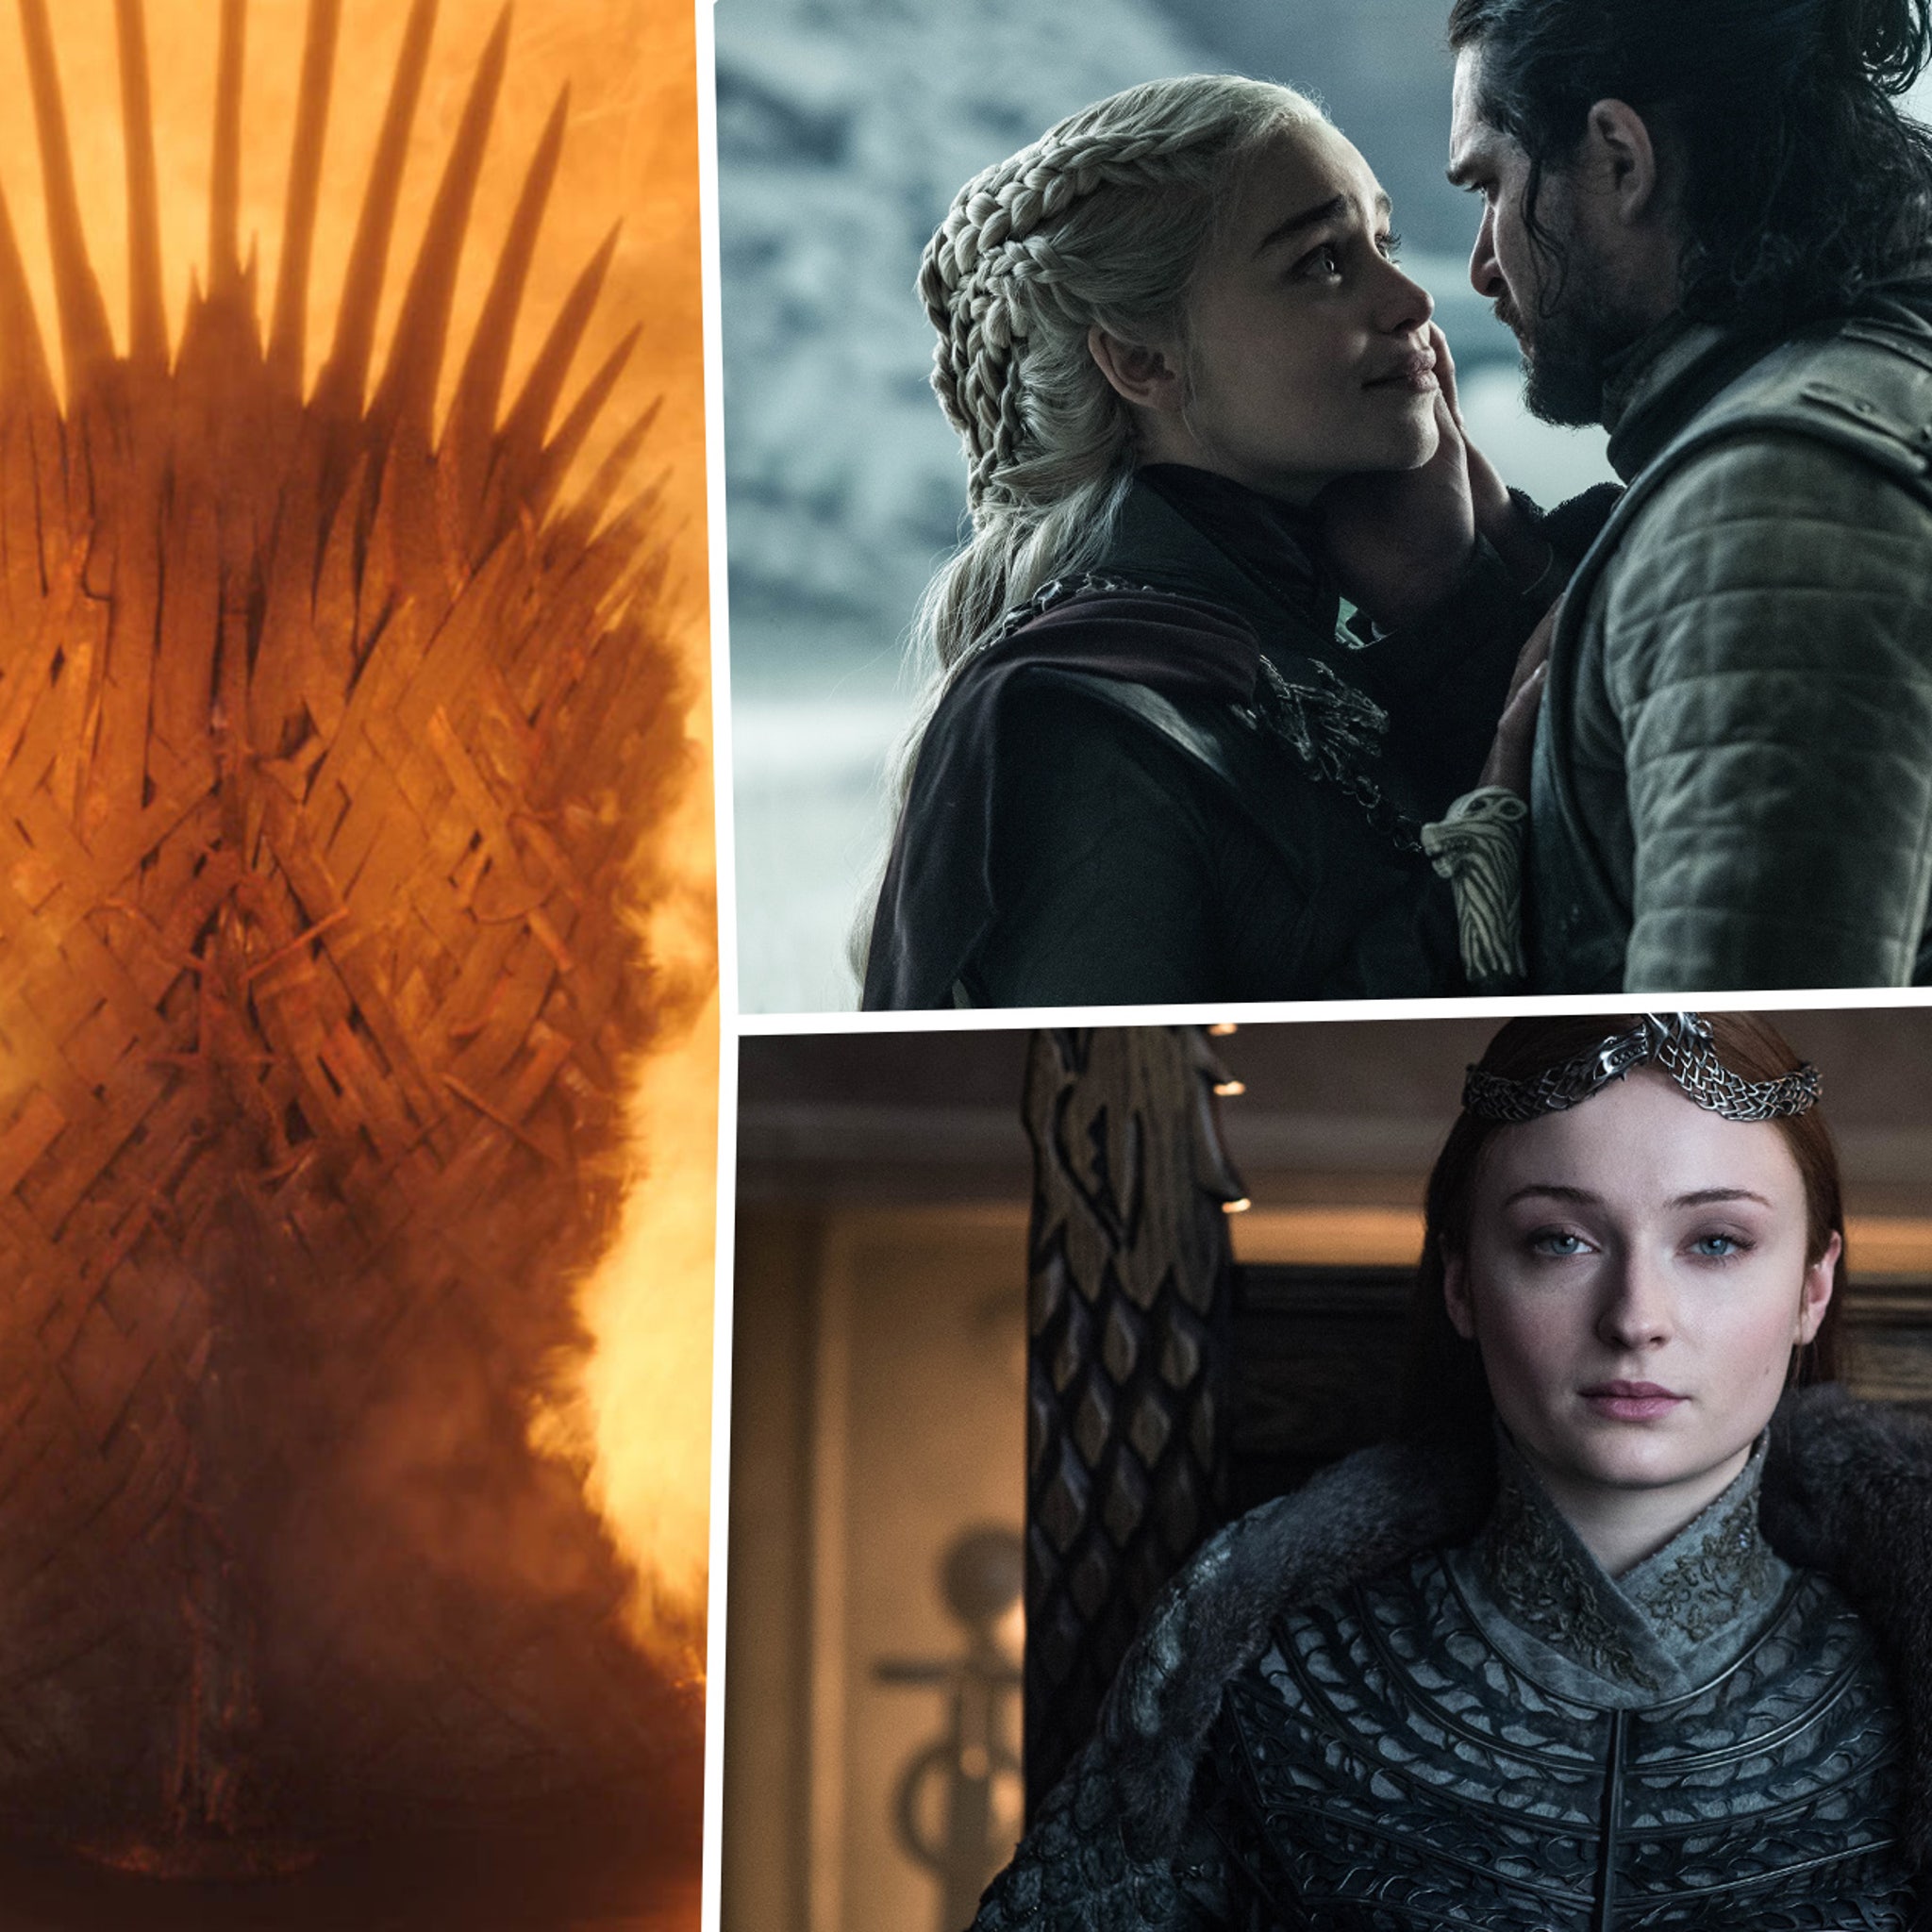 Game of Thrones' Series Finale Ending, Explained: “The Iron Throne